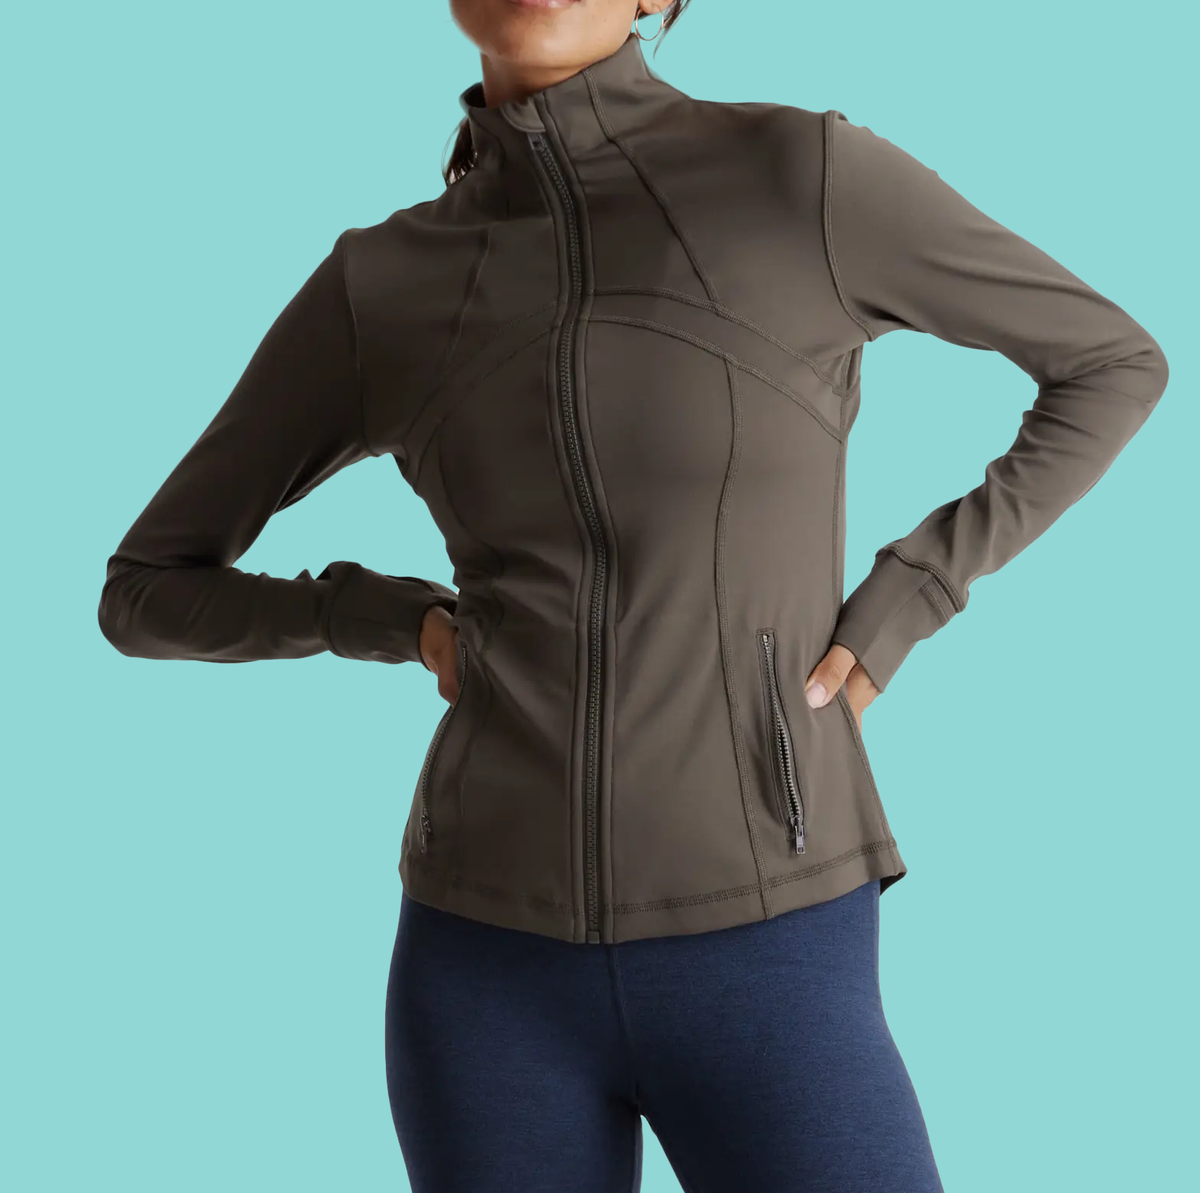 The Complete Guide to Choosing the Right Running Jacket – Nathan Sports